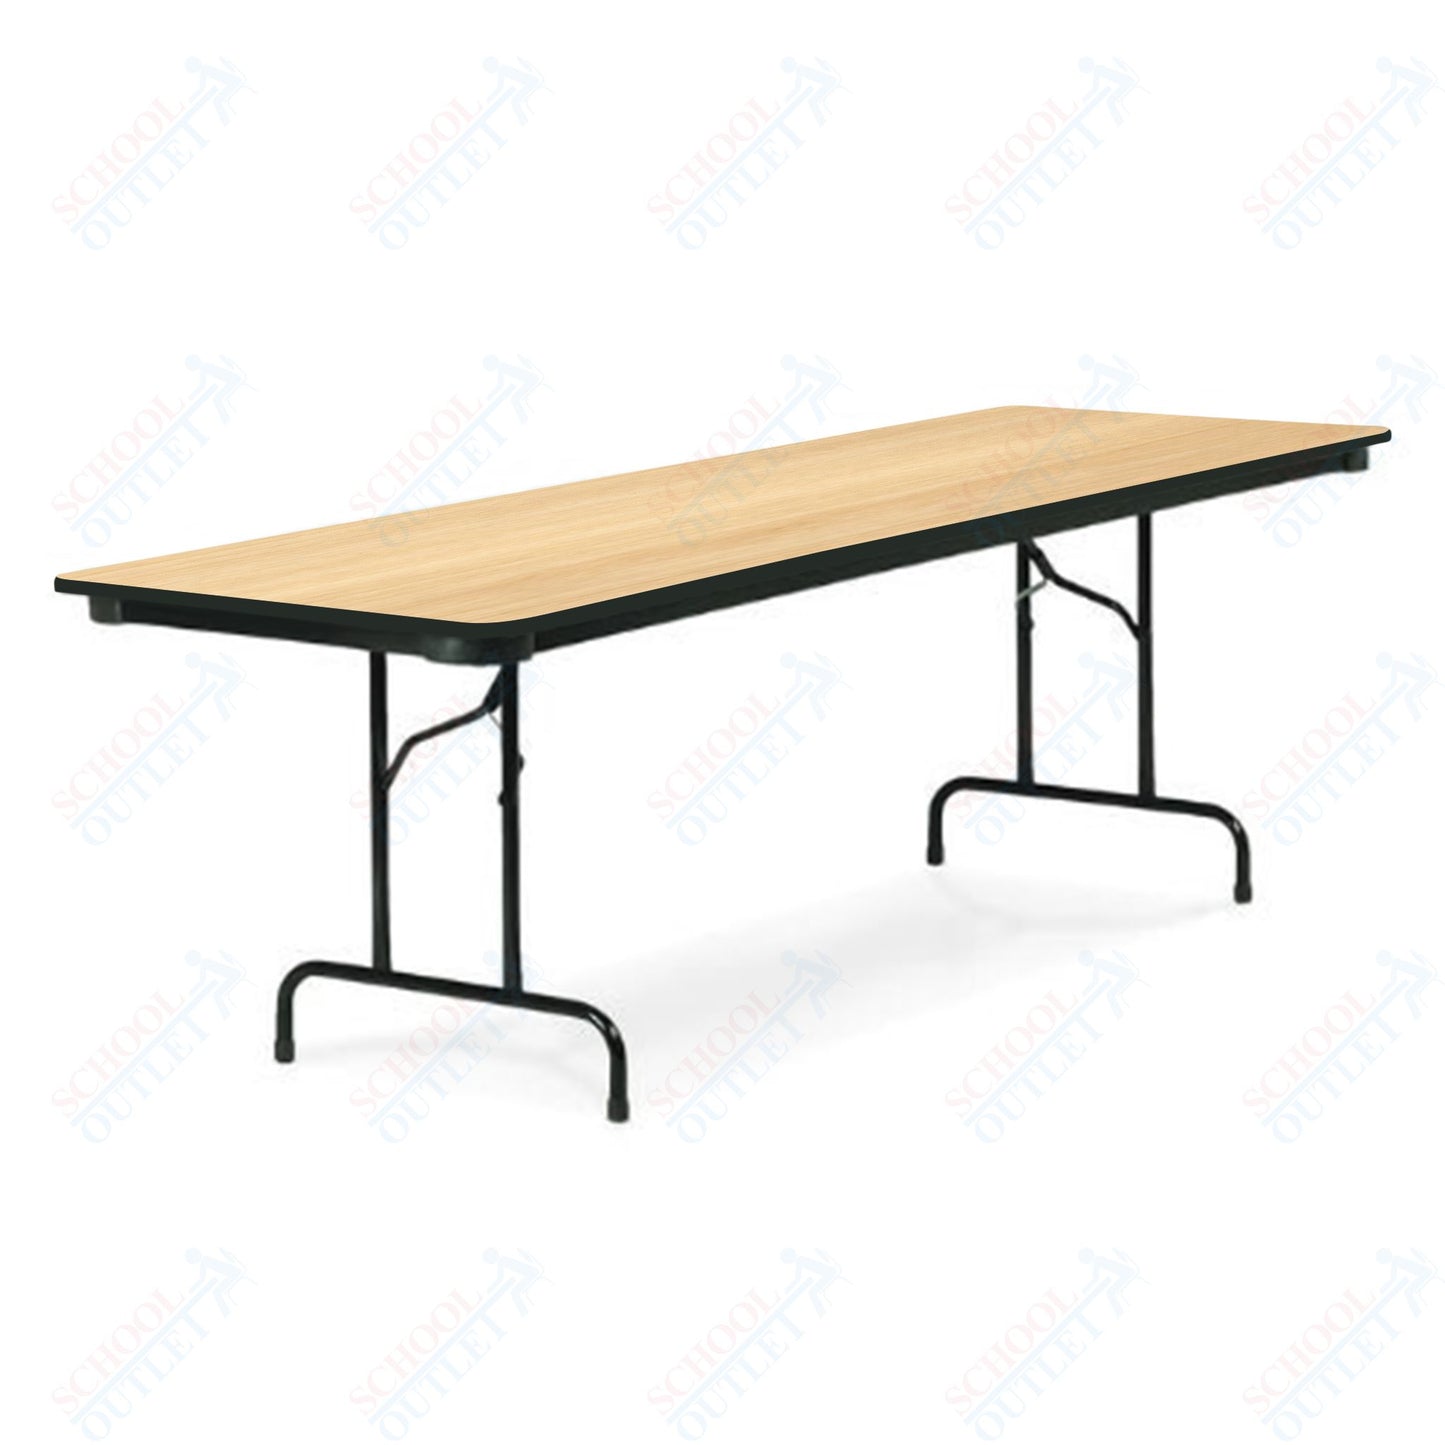 Virco 603672 Sale  - 6000 series 3/4" thick particle board folding table 36" x 72"